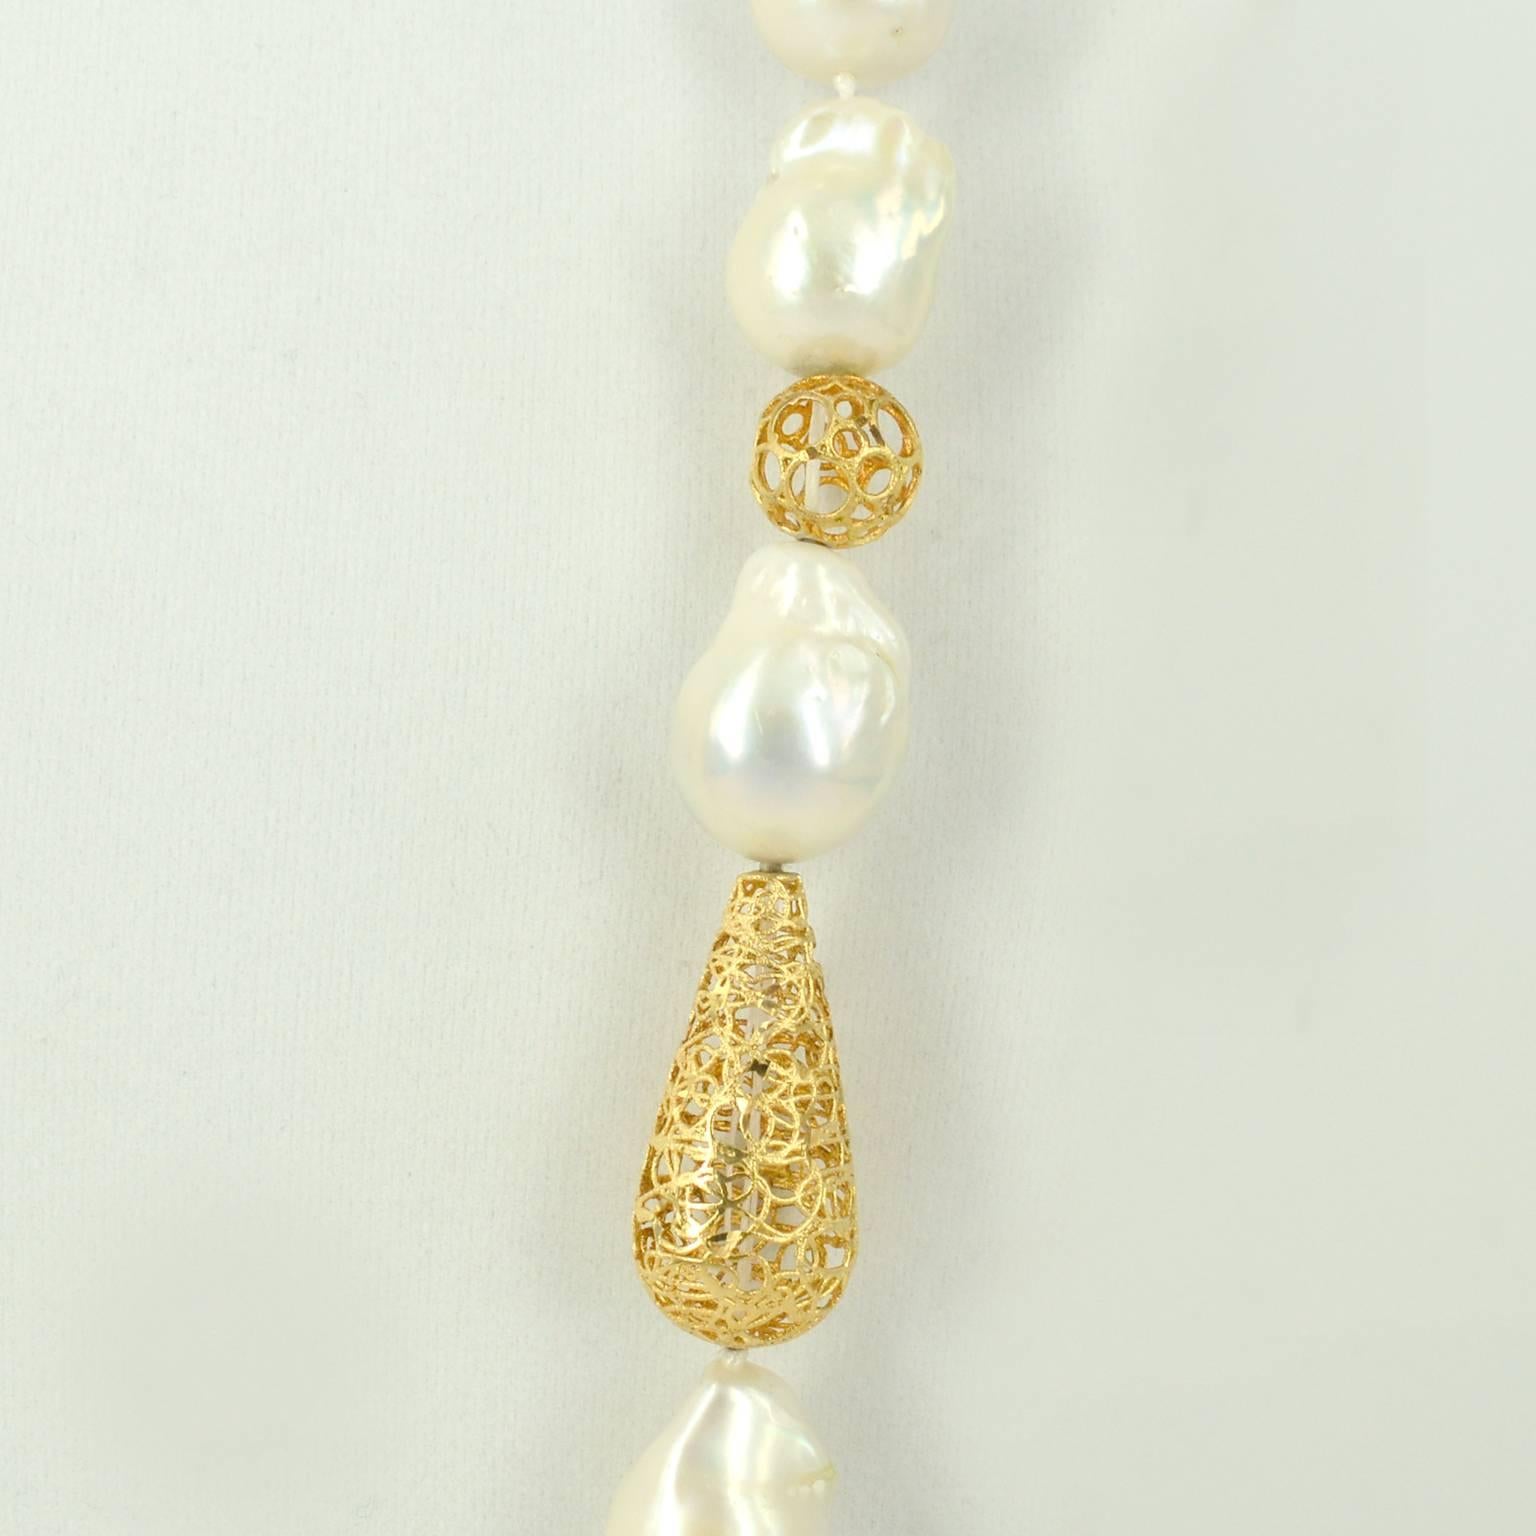 Gorgeous large Freshwater Baroque Pearls with 18k gold hand made beads.
Average pearl measures 21mm x 14mm. Hand knotted on cream thread with 9k gold 14mm round clasp.
Total length 90cm.

